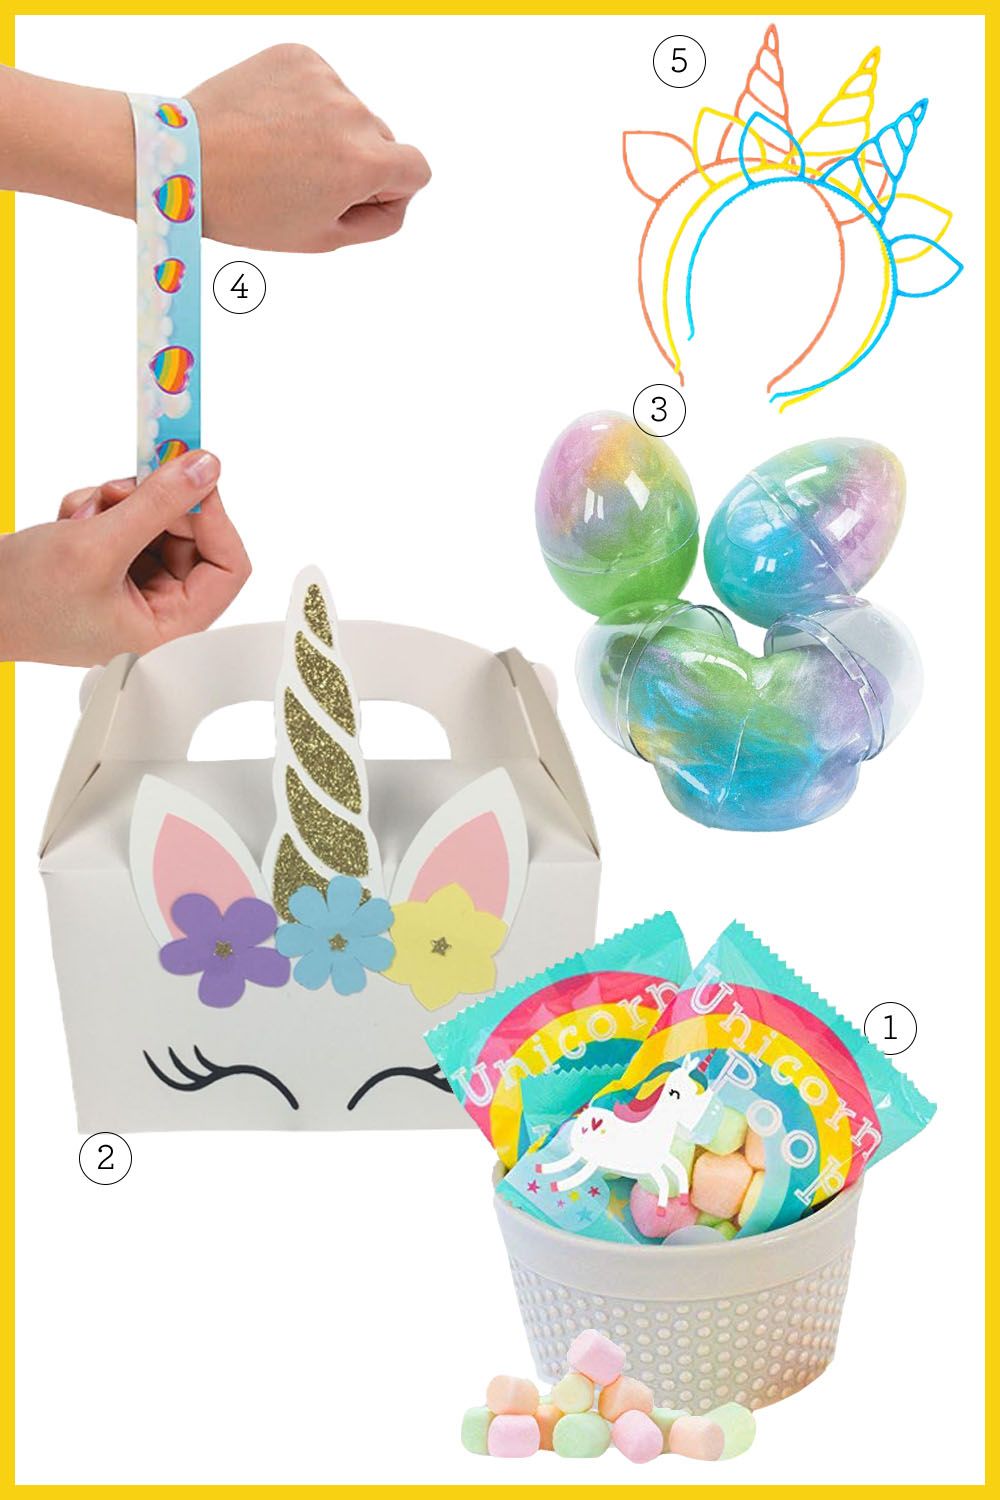 Pack of 10 Party Goodie Bags Birthday Gift Bags-Frozen Theme Bags